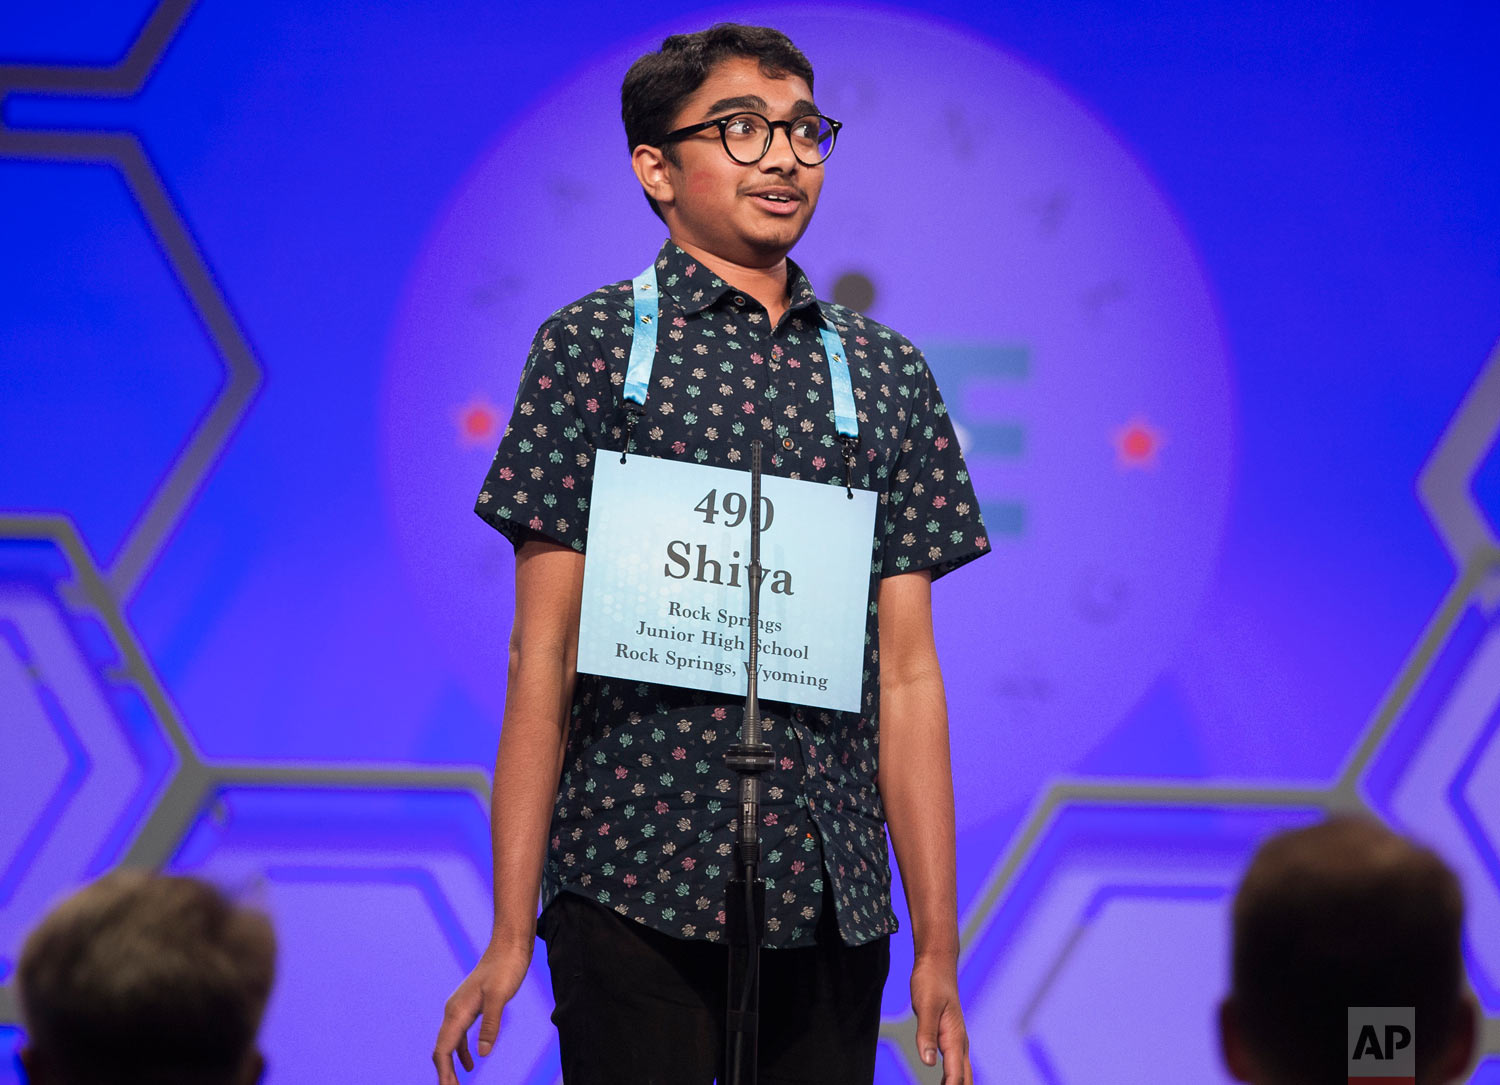  Shiva Yeshlur, 13, from Rock Springs, Wyo., jumps into the air after correctly spelling "diastrophism" during the third round of the Scripps National Spelling Bee in Oxon Hill, Md., Wednesday, May 30, 2018. (AP Photo/Cliff Owen) 